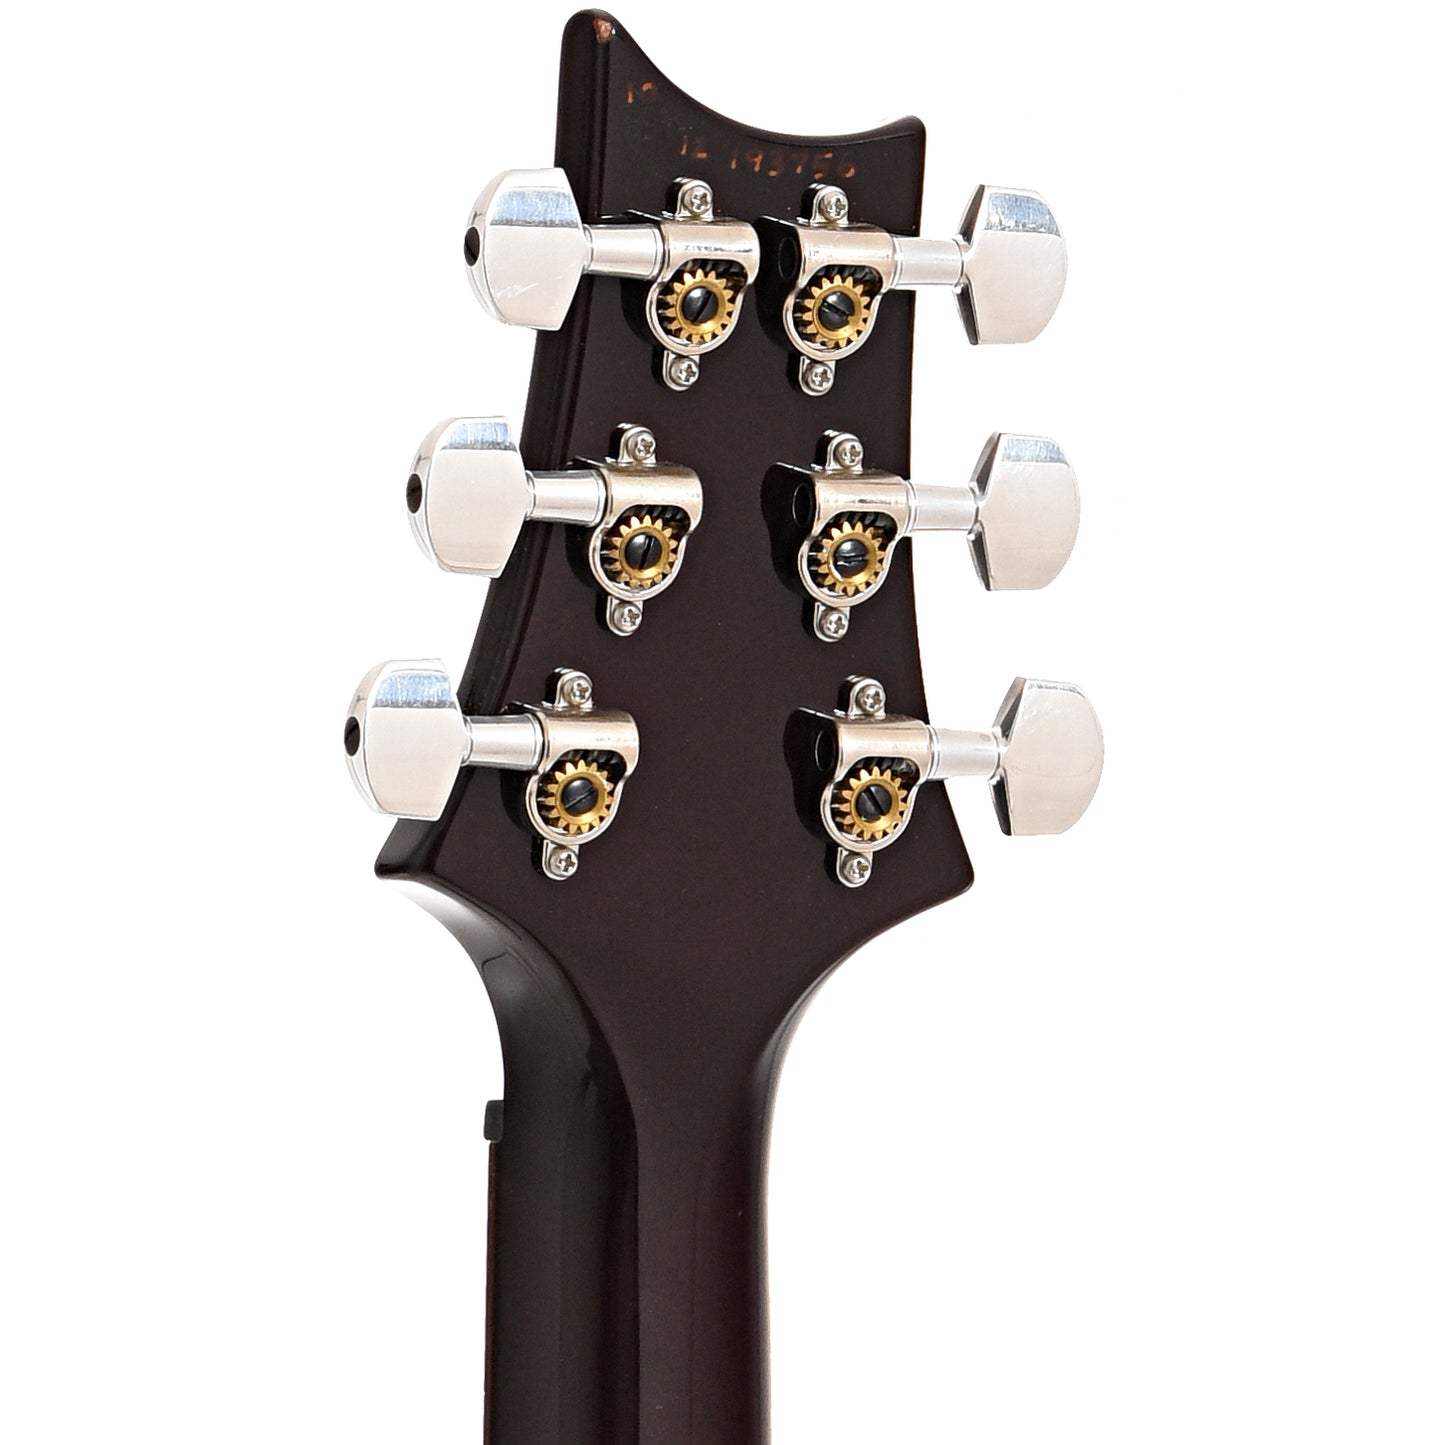 Back headstock of PRS Custom 24 LH Electric